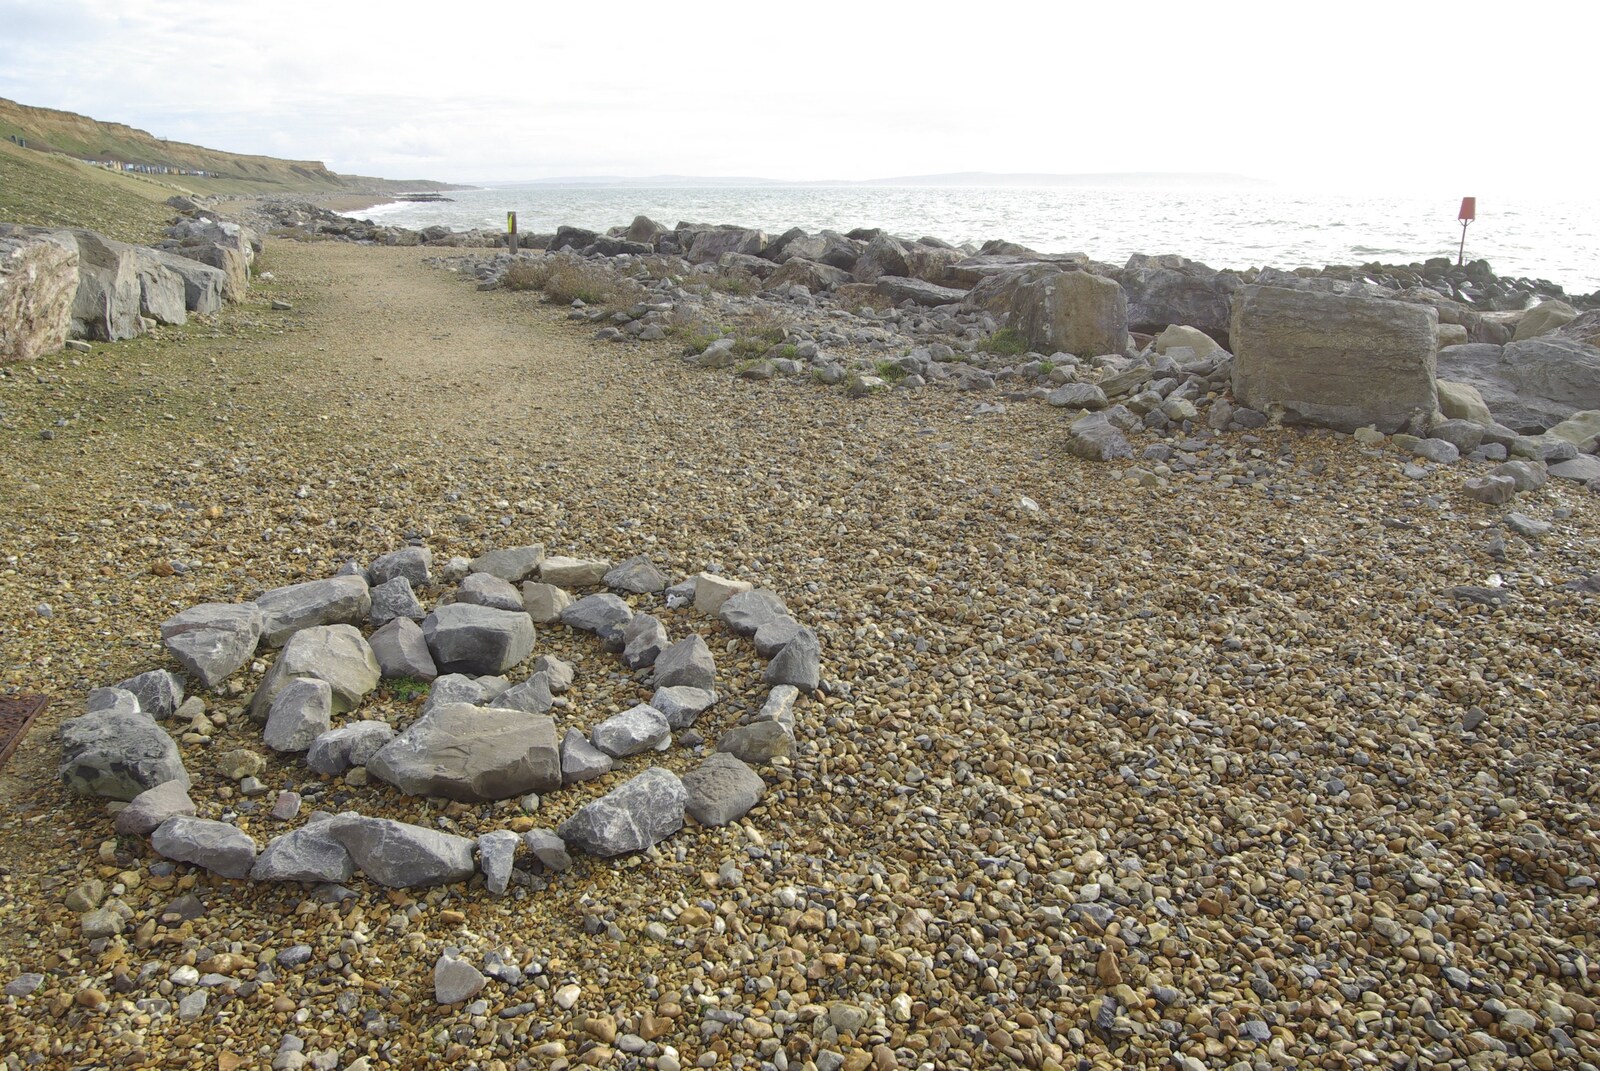 A Trip to New Milton and Barton-on-Sea, Hampshire - 27th November 2008: A rock spiral on the beach